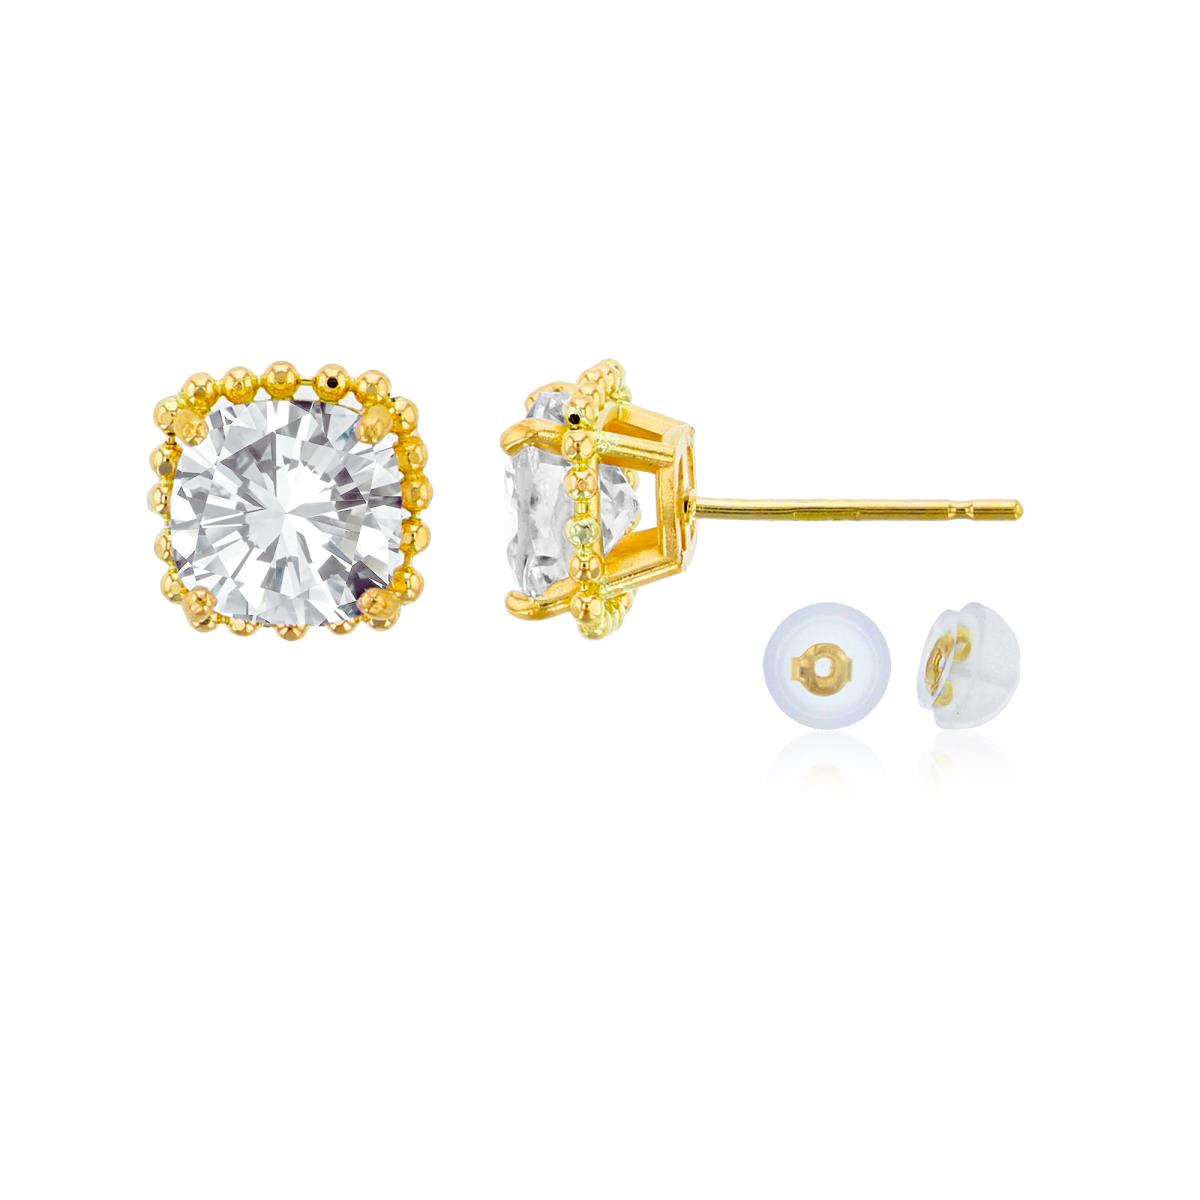 14K Yellow Gold 6x6mm Cushion Cut White Topaz Bead Frame Stud Earring with Silicone Back